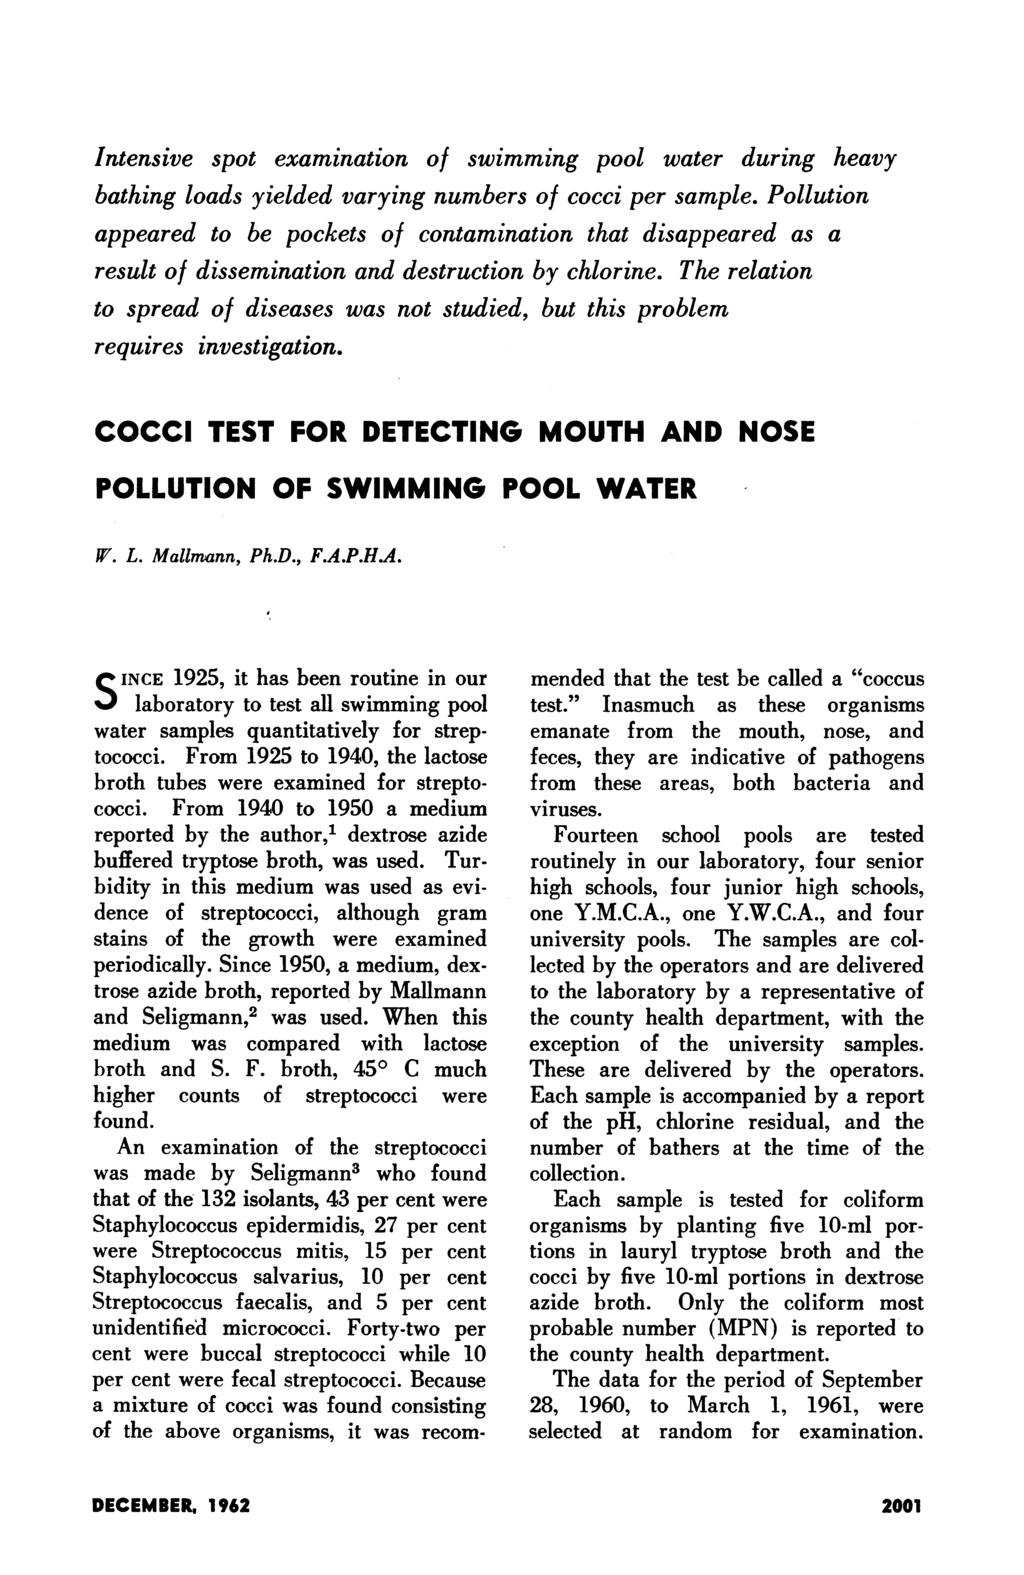 ntensive spot examination of swimming pool water during heavy bathing loads yielded varying numbers of cocci per sample.